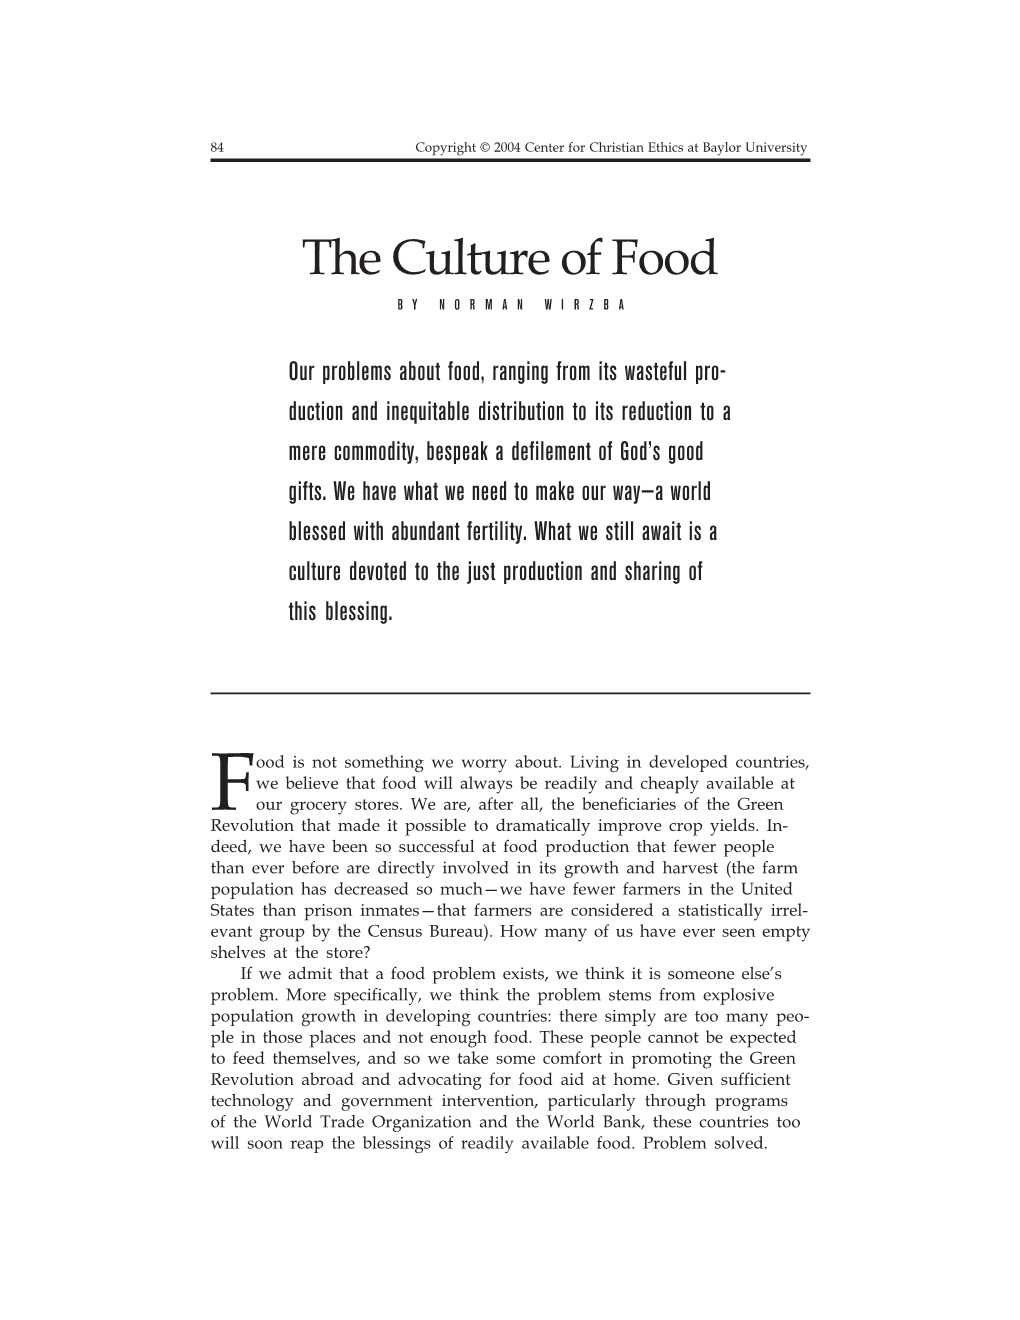 The Culture of Food by NORMAN WIRZBA